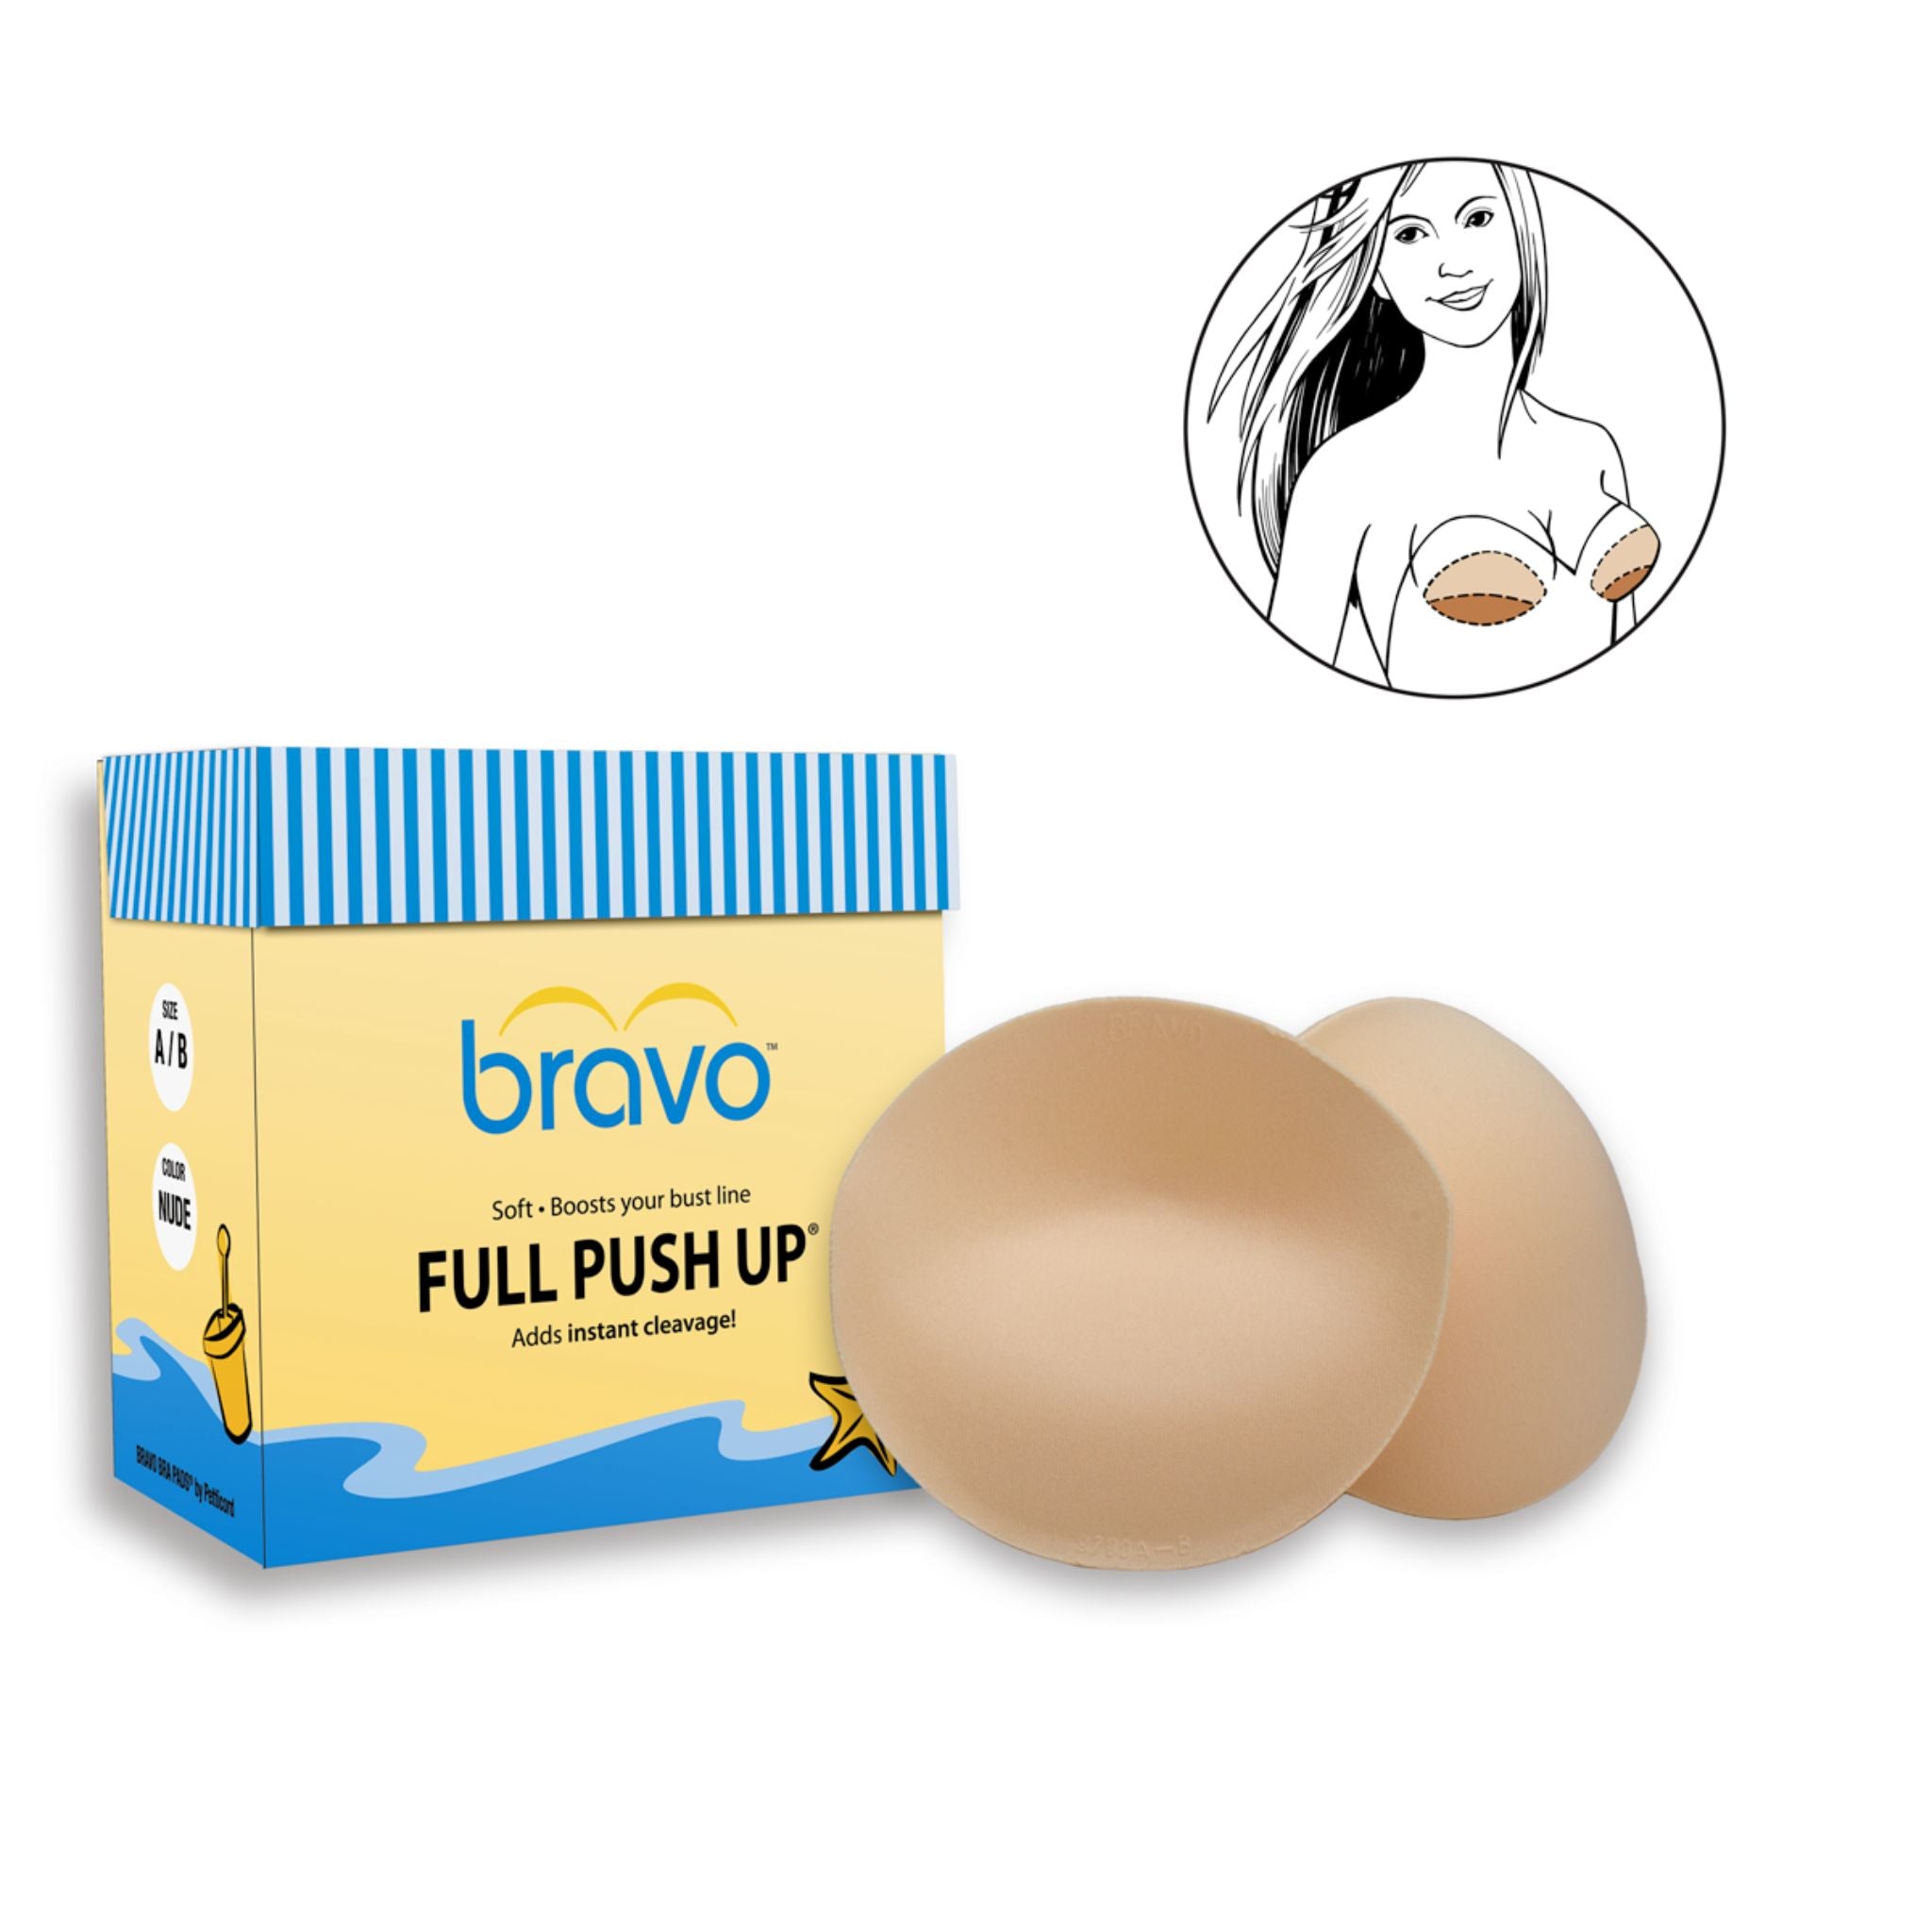 Bravo’s Full Push Up bra pad inserts are soft, supportive and fun to wear. Their built-in push up pad lifts the breasts up for instant cleavage and curves! Full Push Ups (Style 9700) are very light and comfortable to wear.